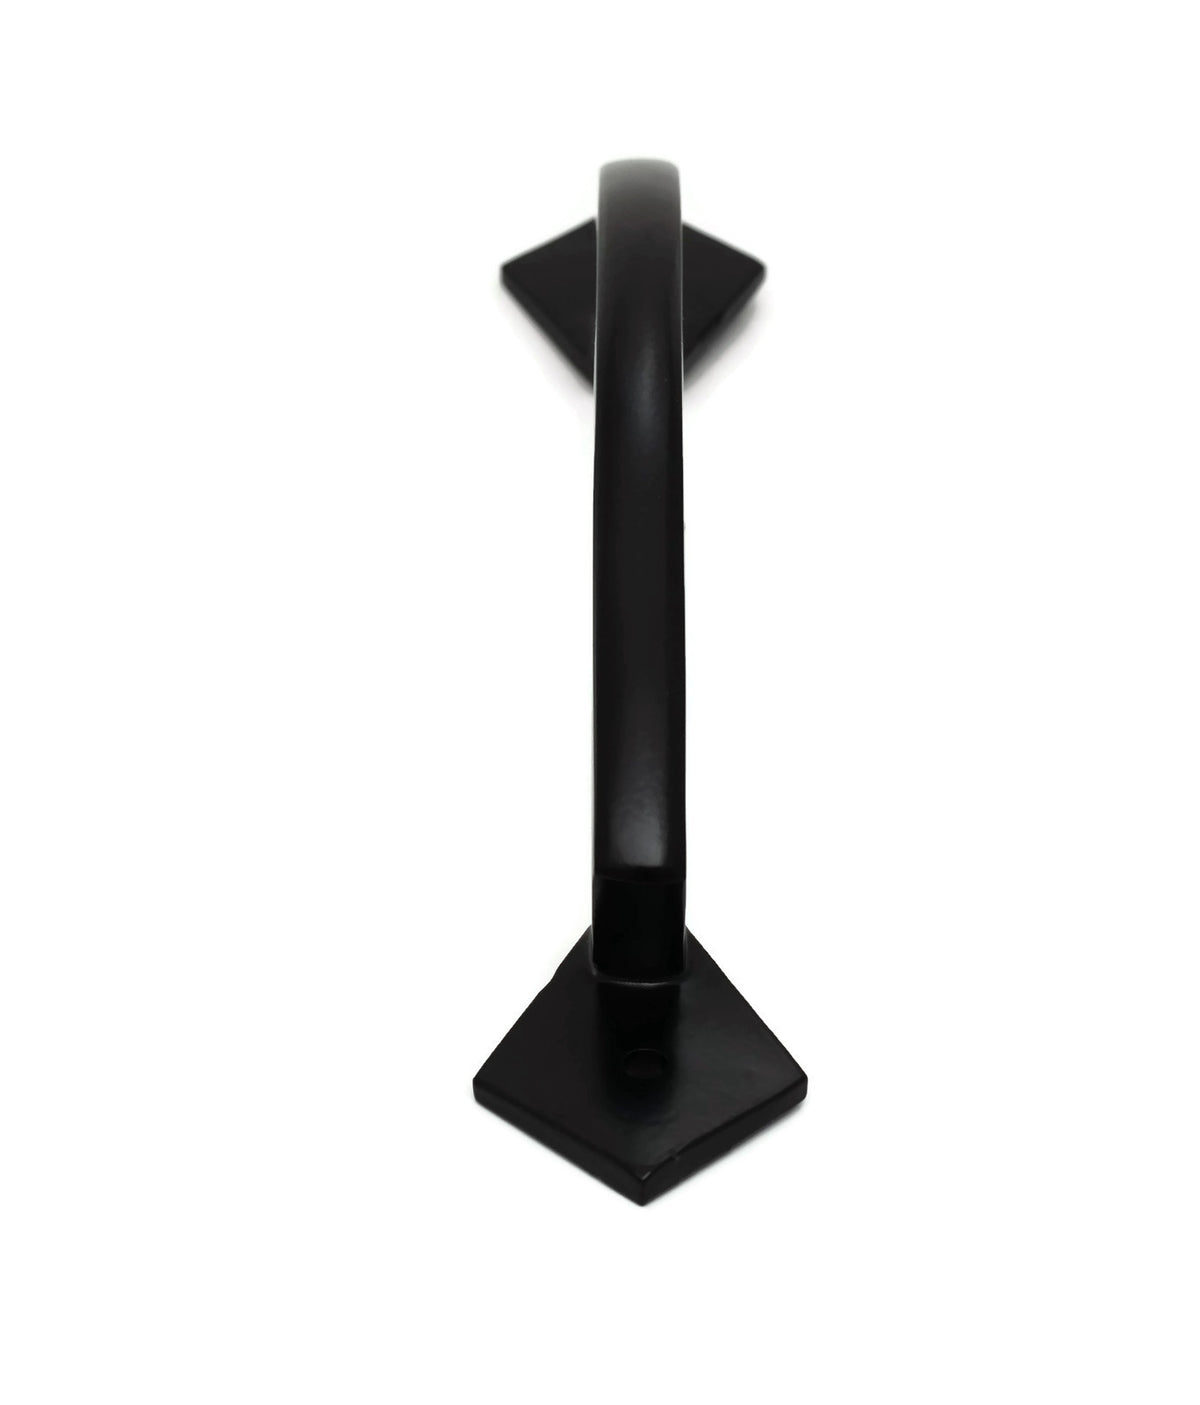 Iron Grab Pull Handle for Doors - Long Arch - Black - For Barns, Gates, and more